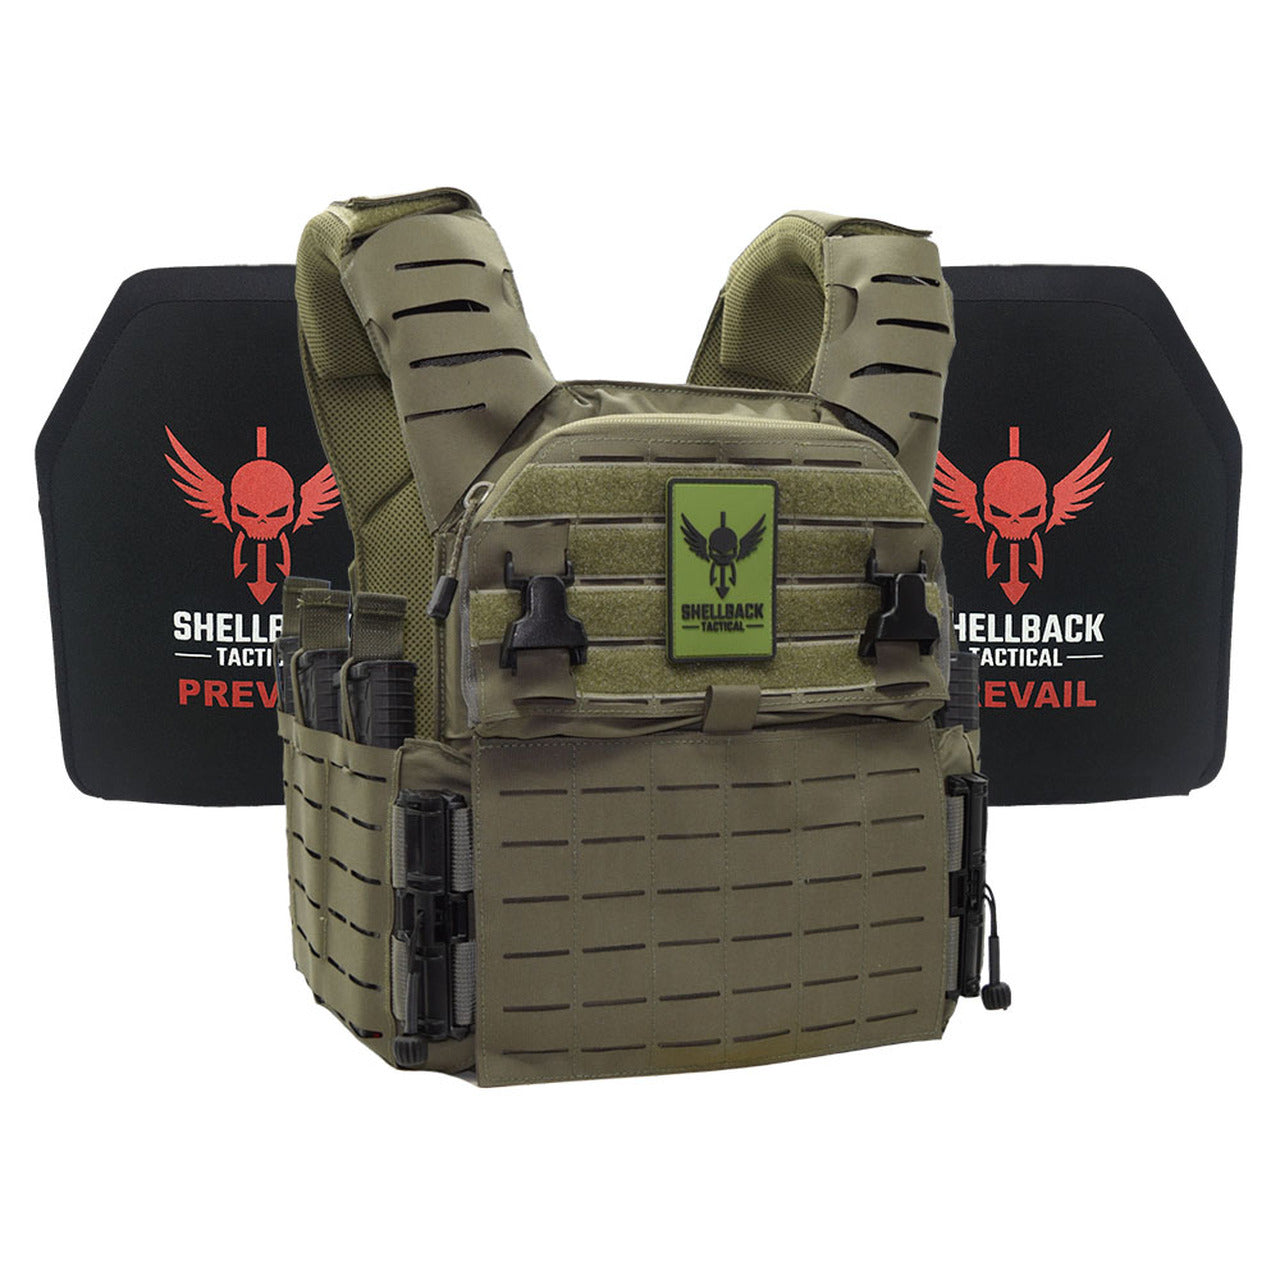 A Shellback Tactical Banshee Elite 3.0 Active Shooter Kit with Level IV 1155 Plates, with a red and black logo on it.